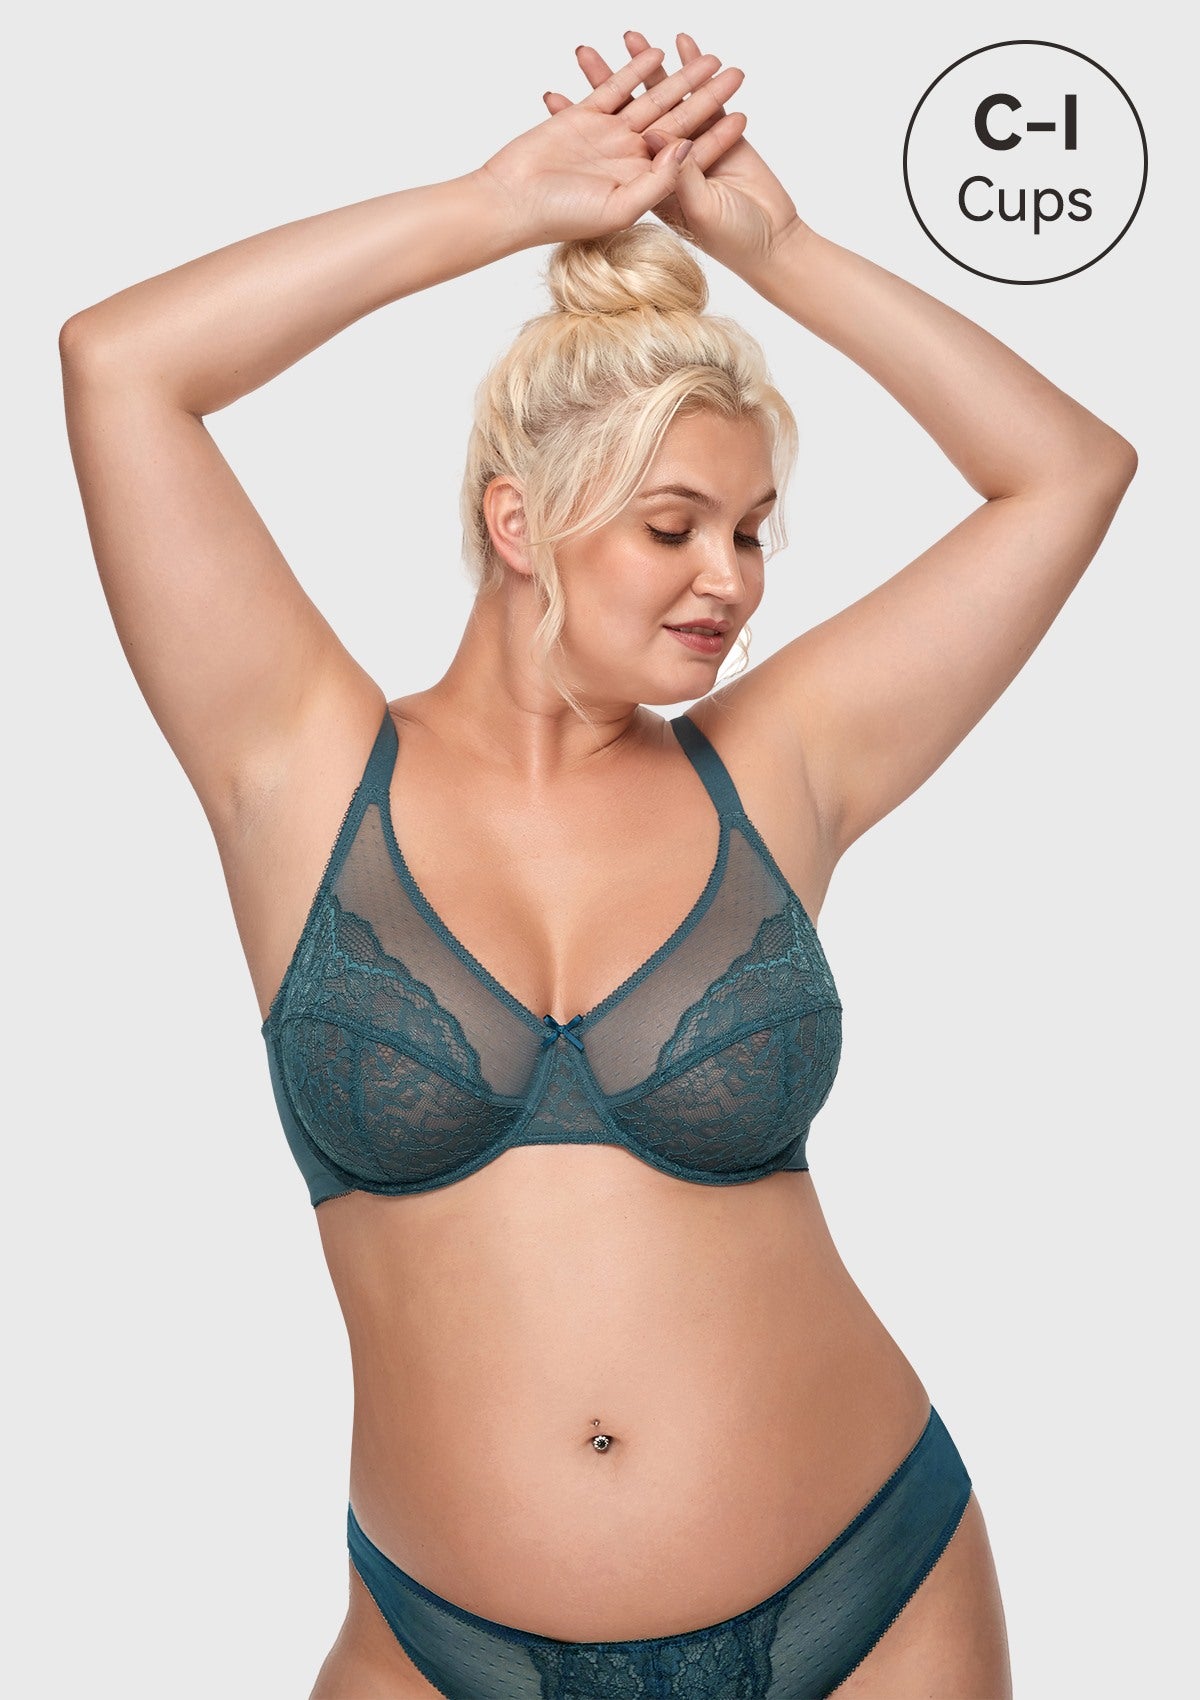 HSIA Enchante Full Coverage Bra: Supportive Bra For Big Busts - Balsam Blue / 34 / C